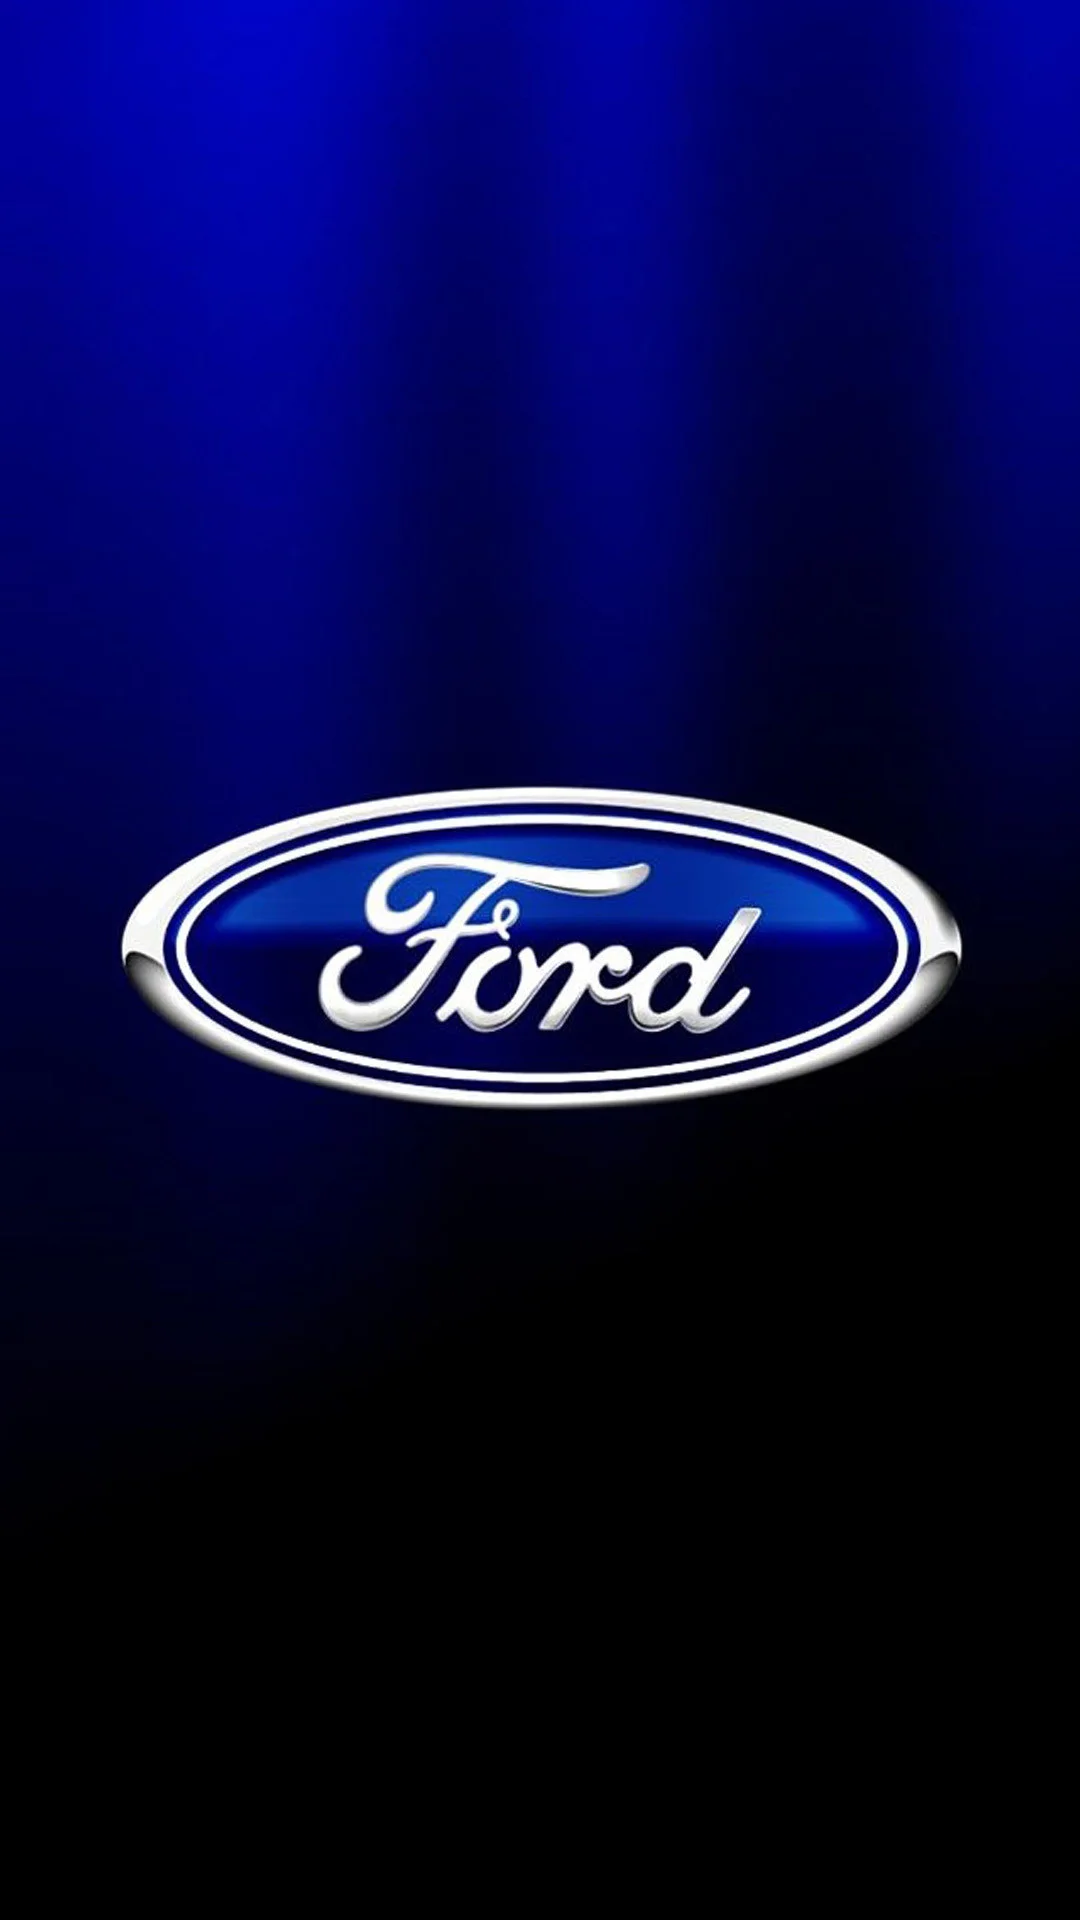 Ford mustang logo wallpapers – Quoteko.com